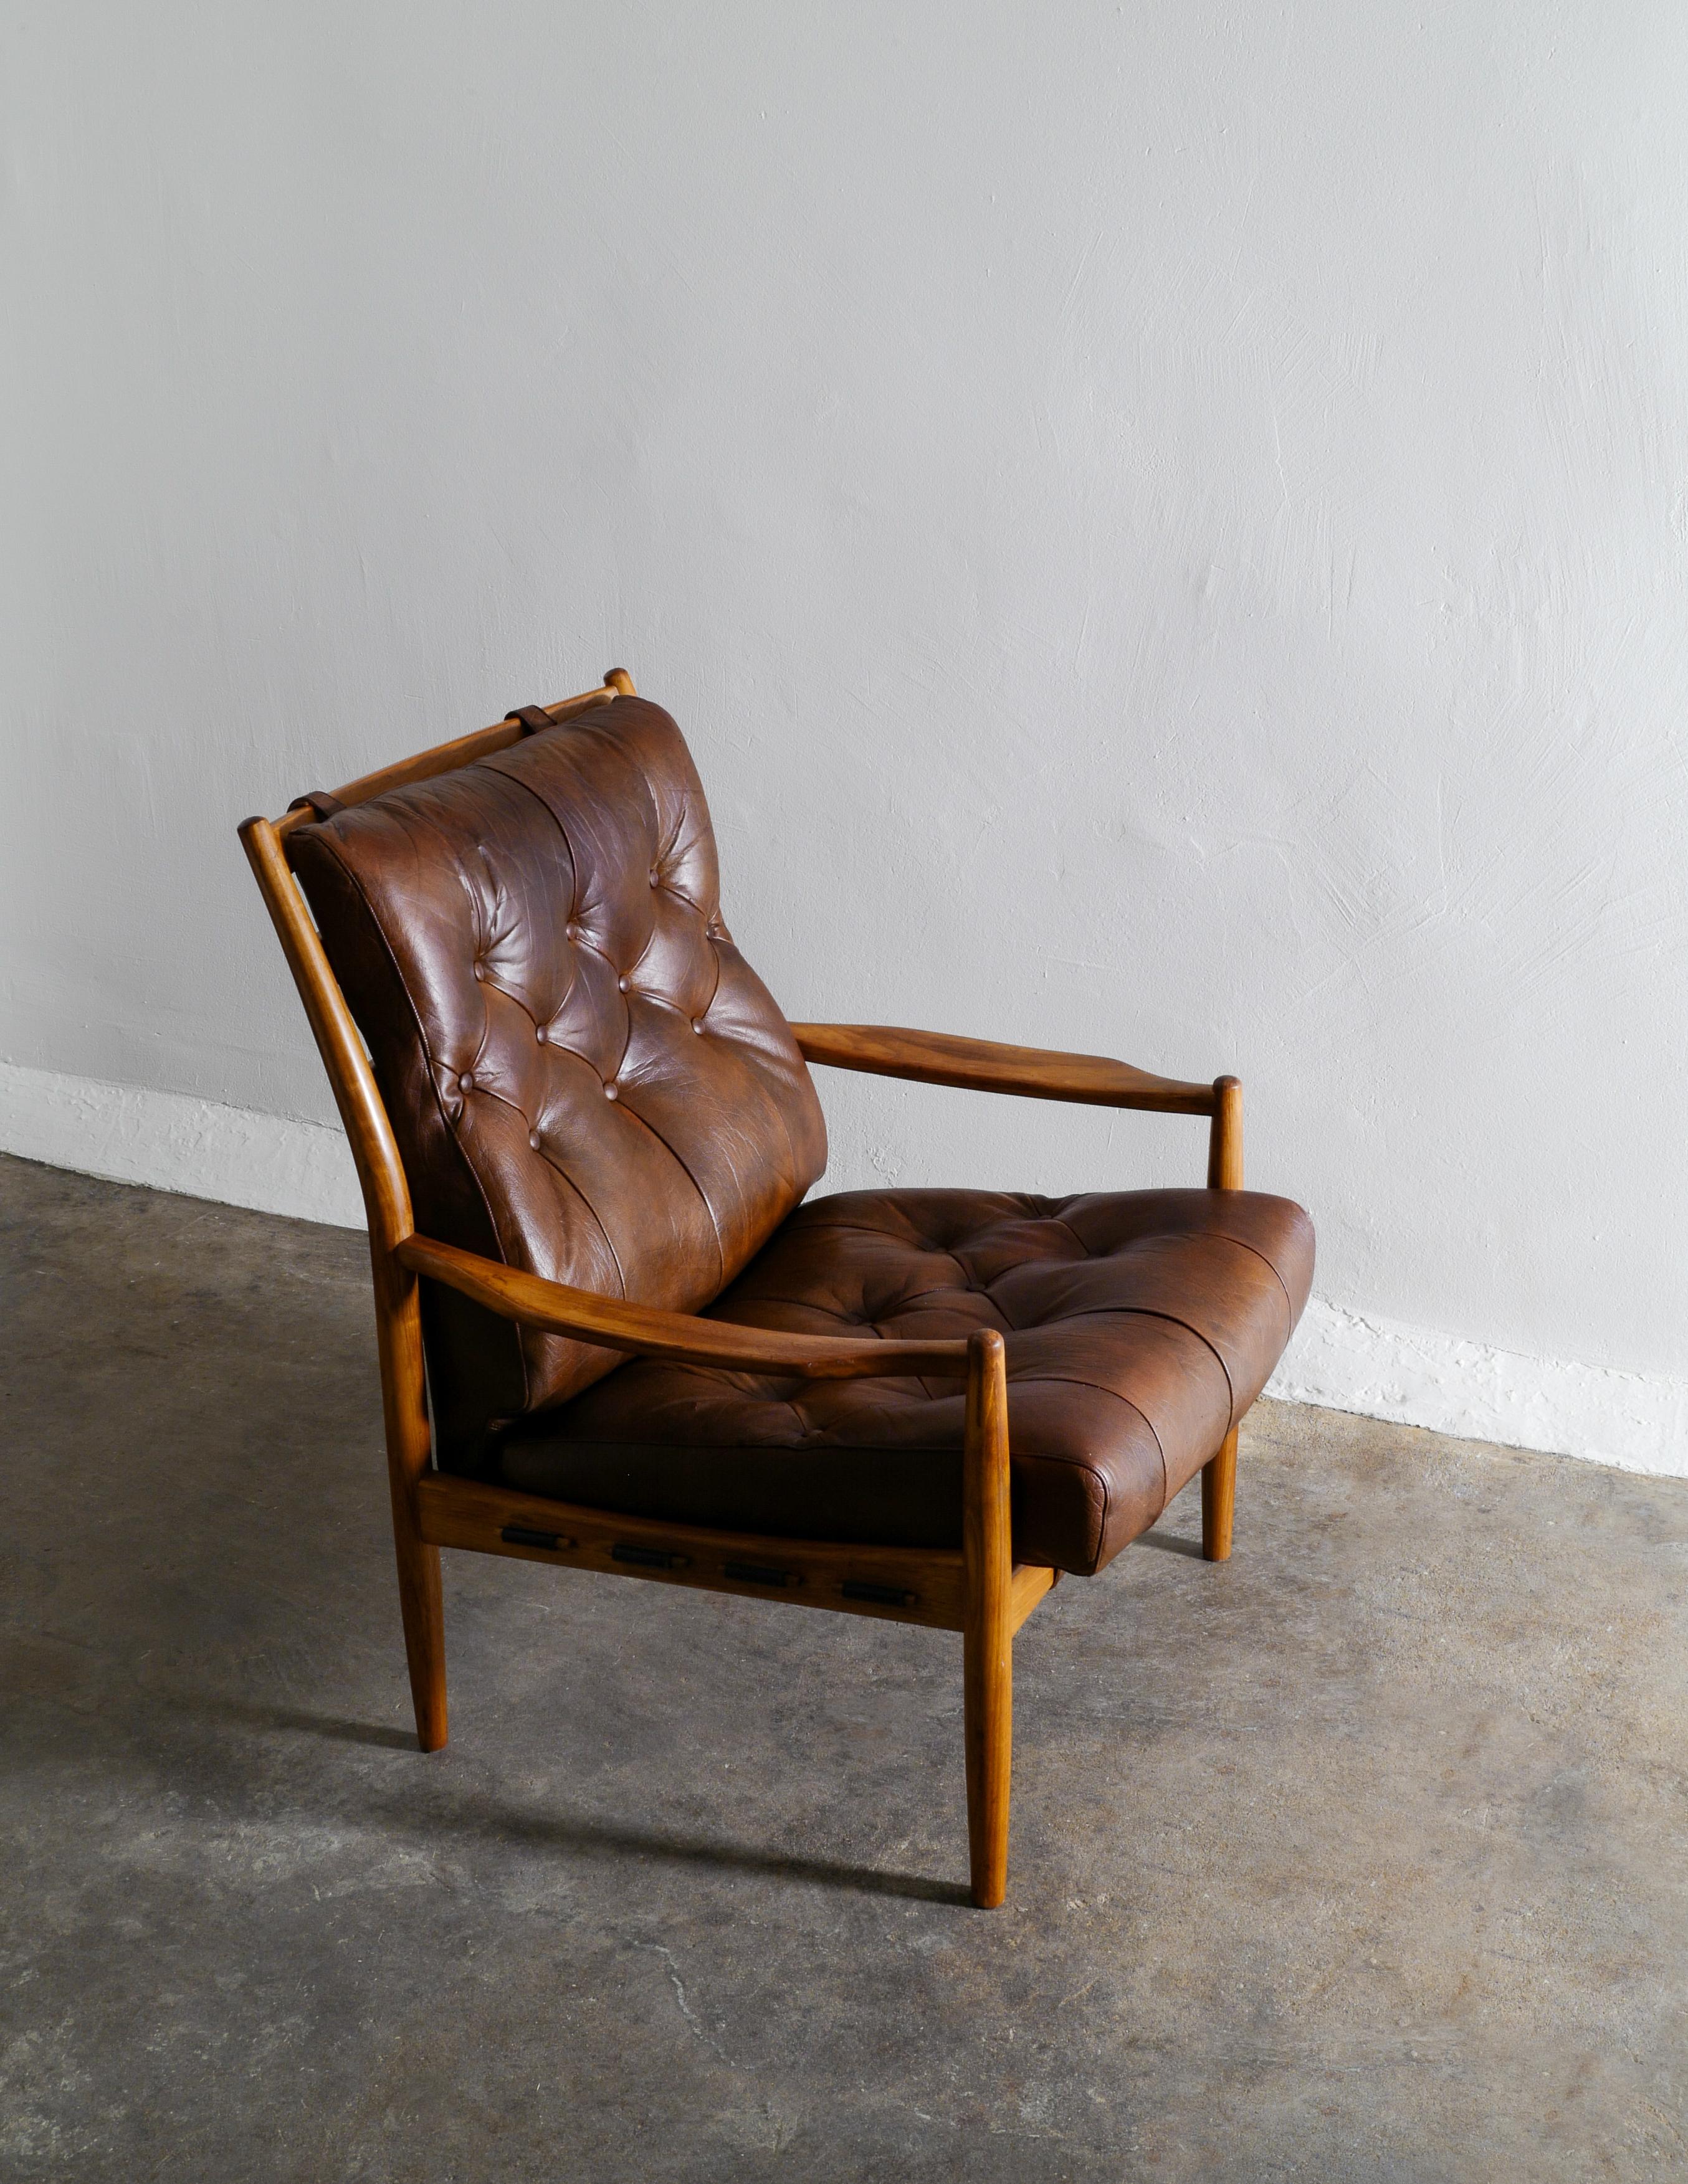 Mid-20th Century Leather Arm Easychair by Ingemar Thillmark Produced by OPE Möbler, Sweden, 1960s